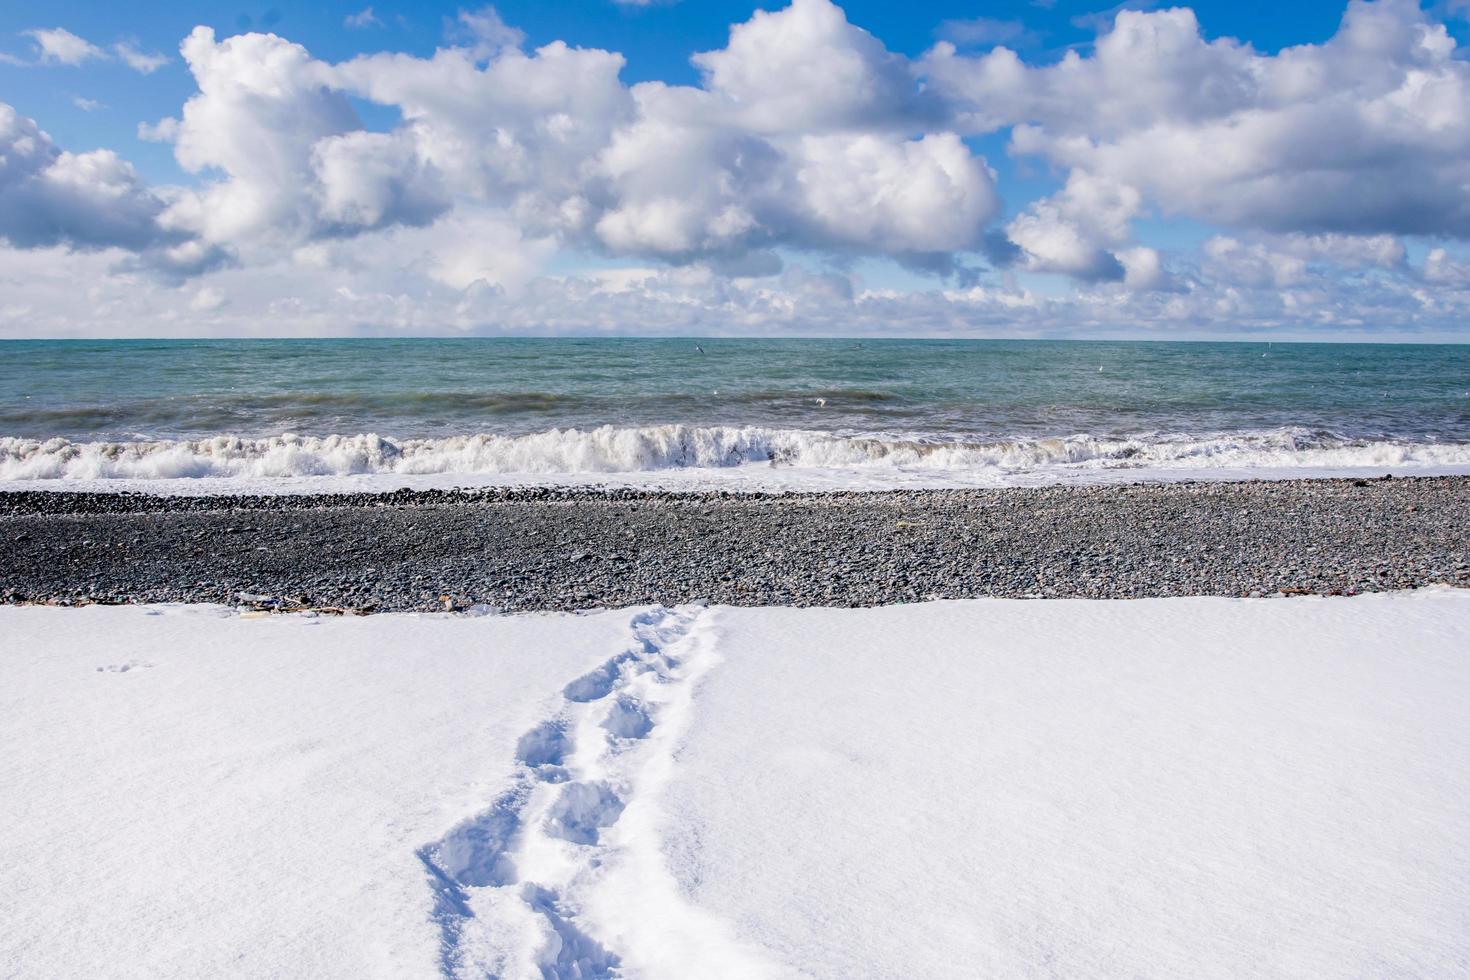 Footsteps on the beach with snow photo